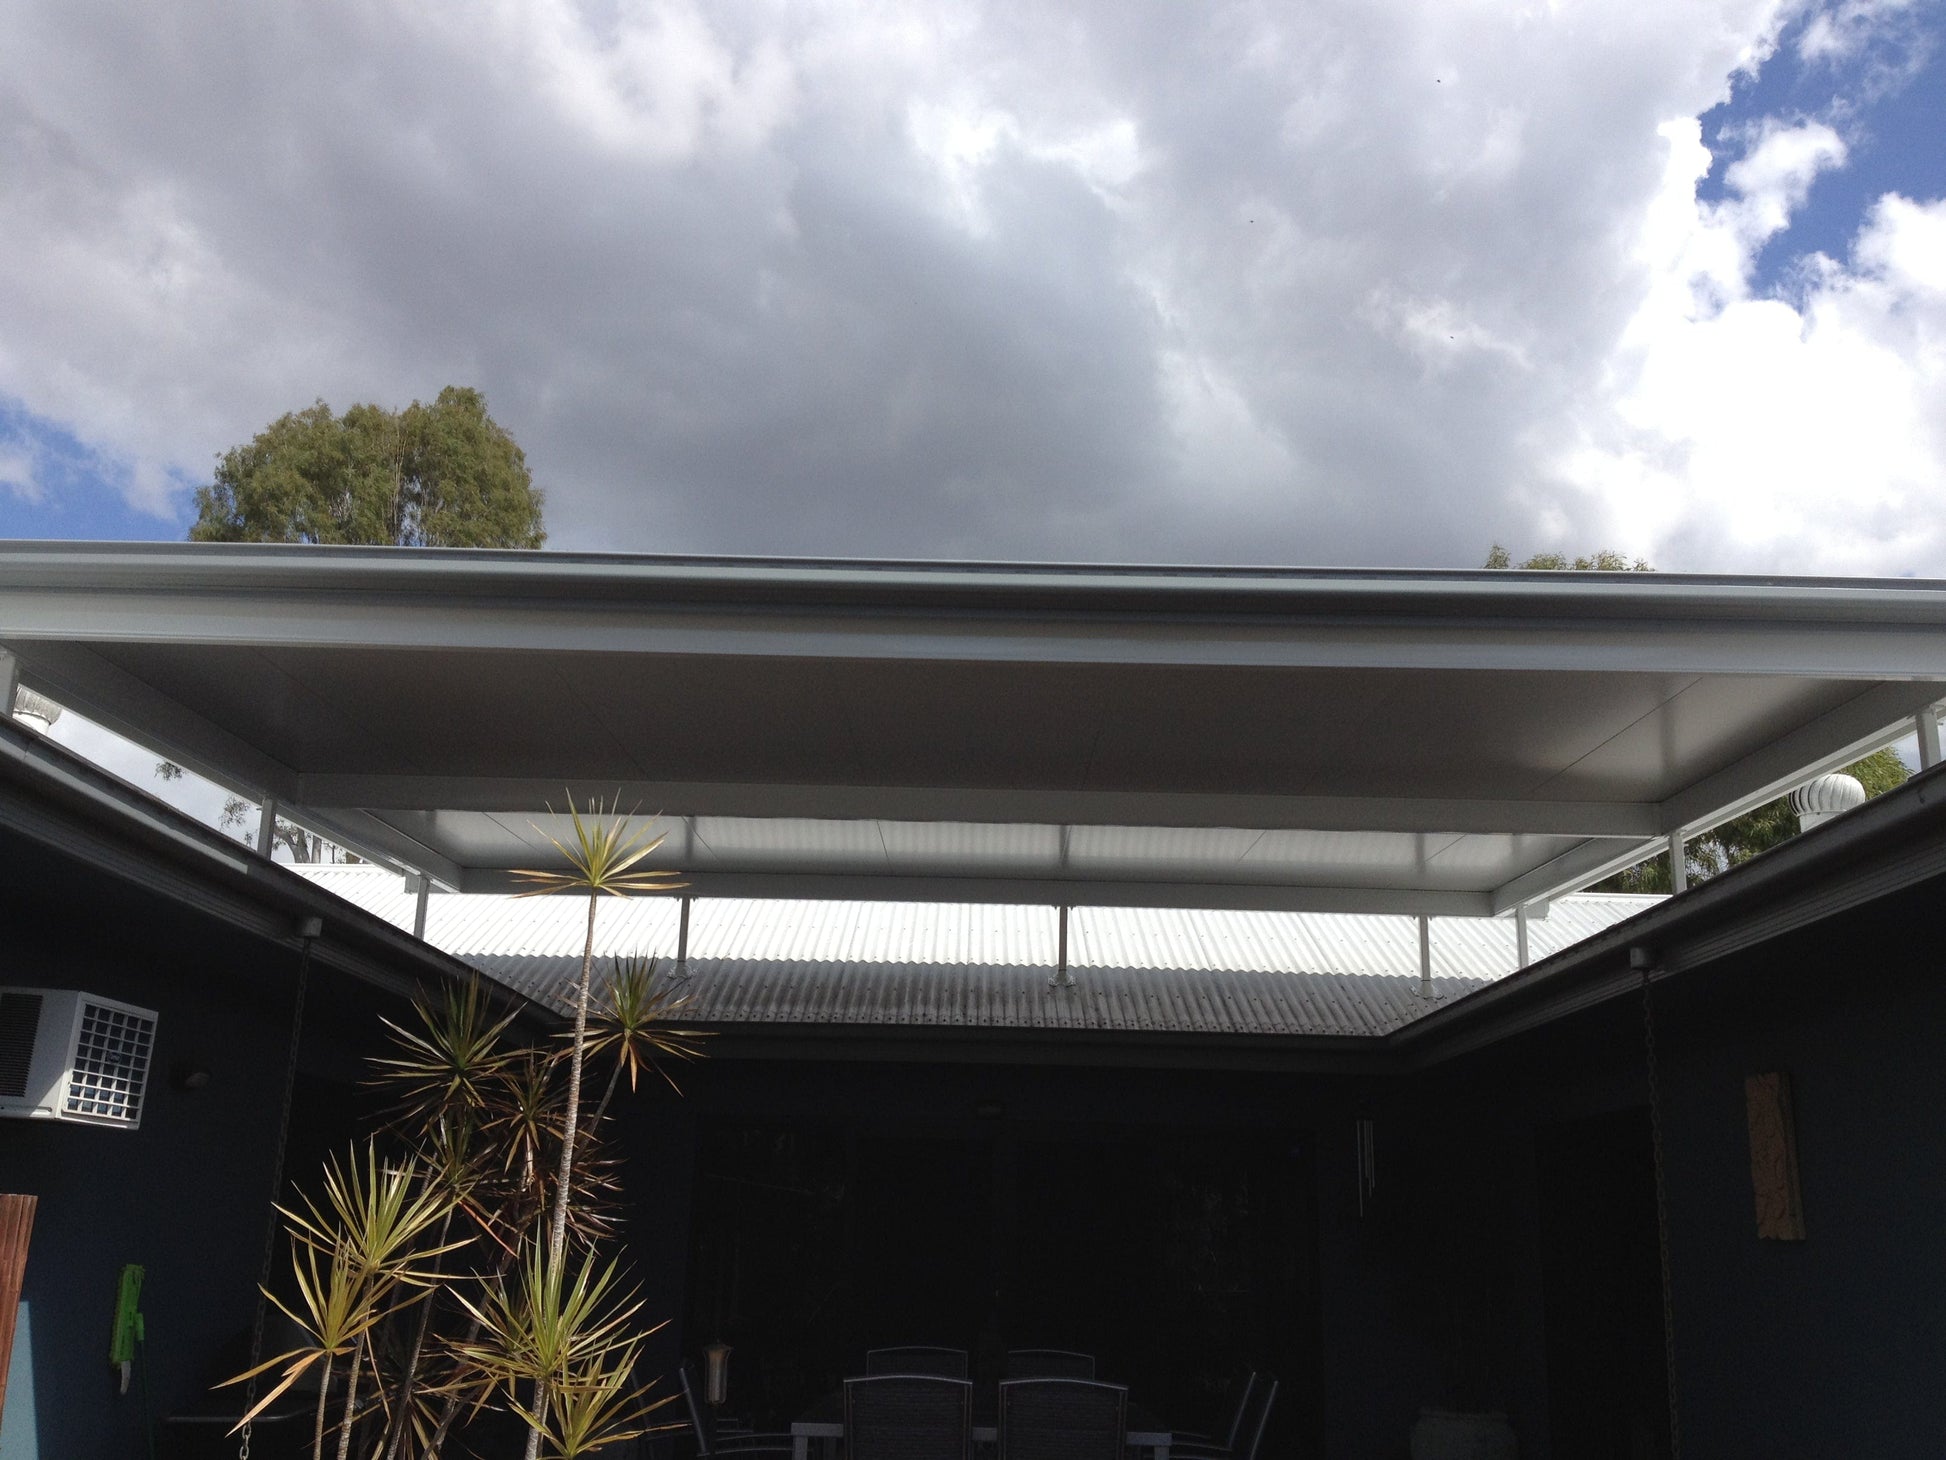 Insulated Flyover Patio Roof - 7m x 5m- Supply & Install QHI National